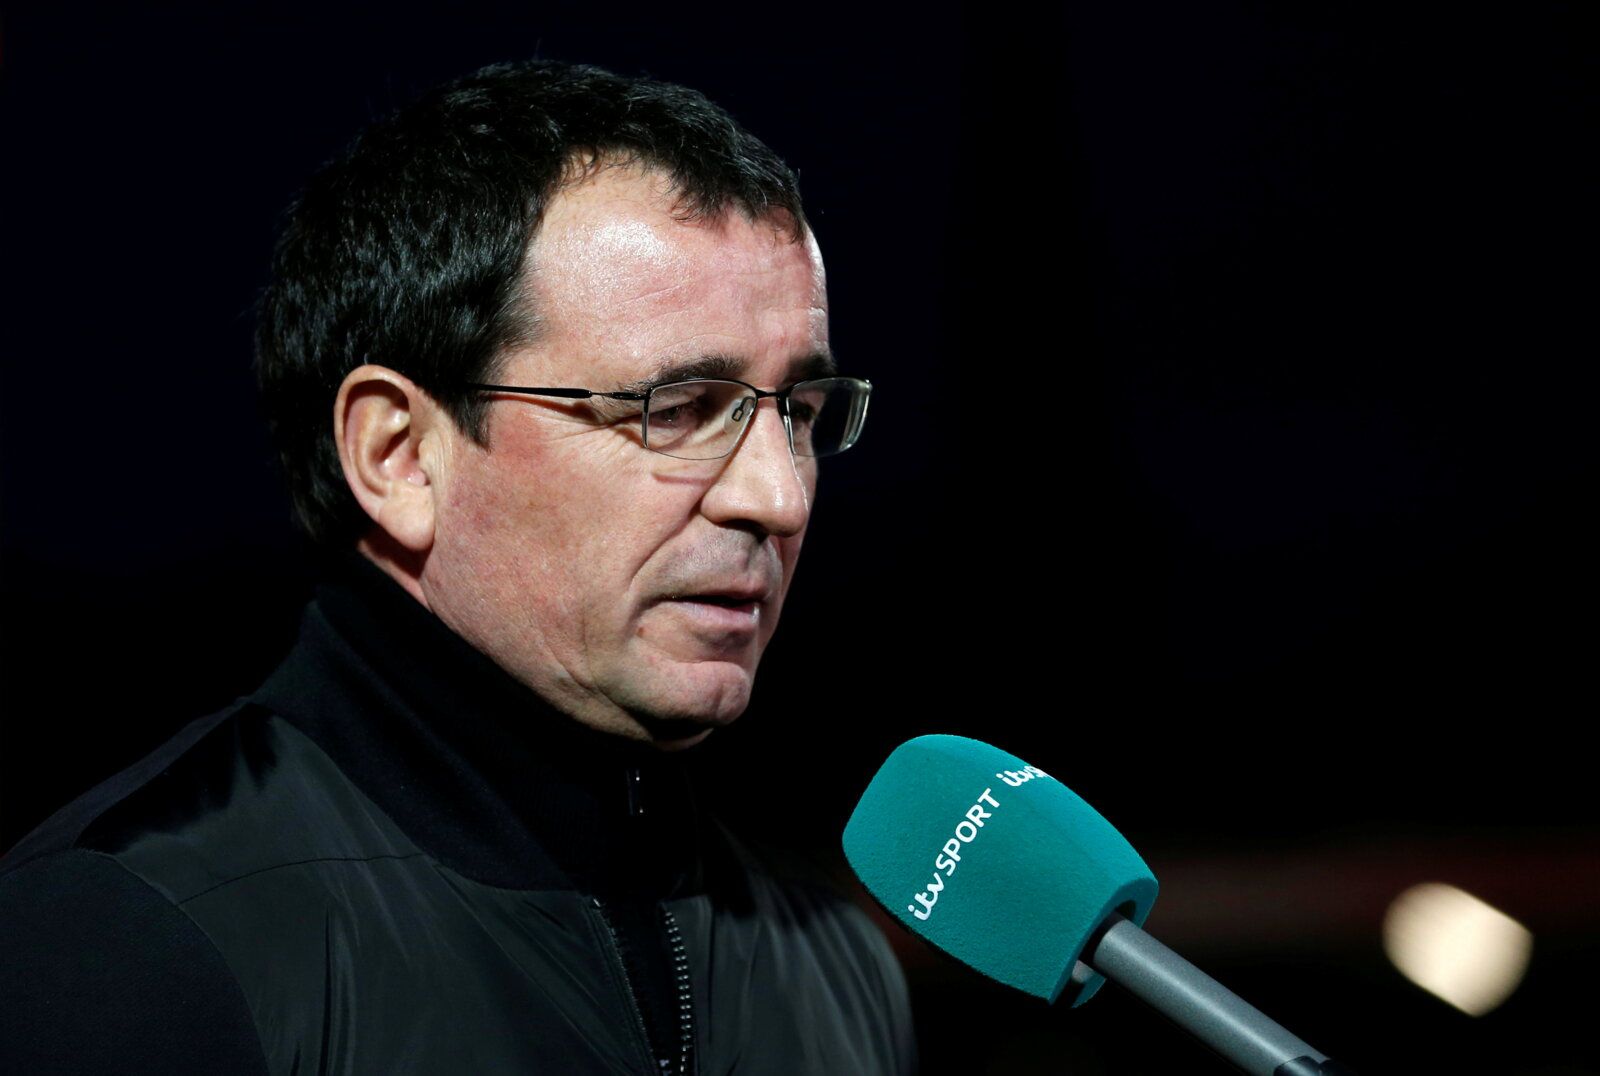 Soccer Football - FA Cup Second Round - Salford City v Chesterfield - The Peninsula Stadium, Salford, Britain - December 5, 2021 Salford City manager Gary Bowyer being interviewed before the match   Action Images/Ed Sykes